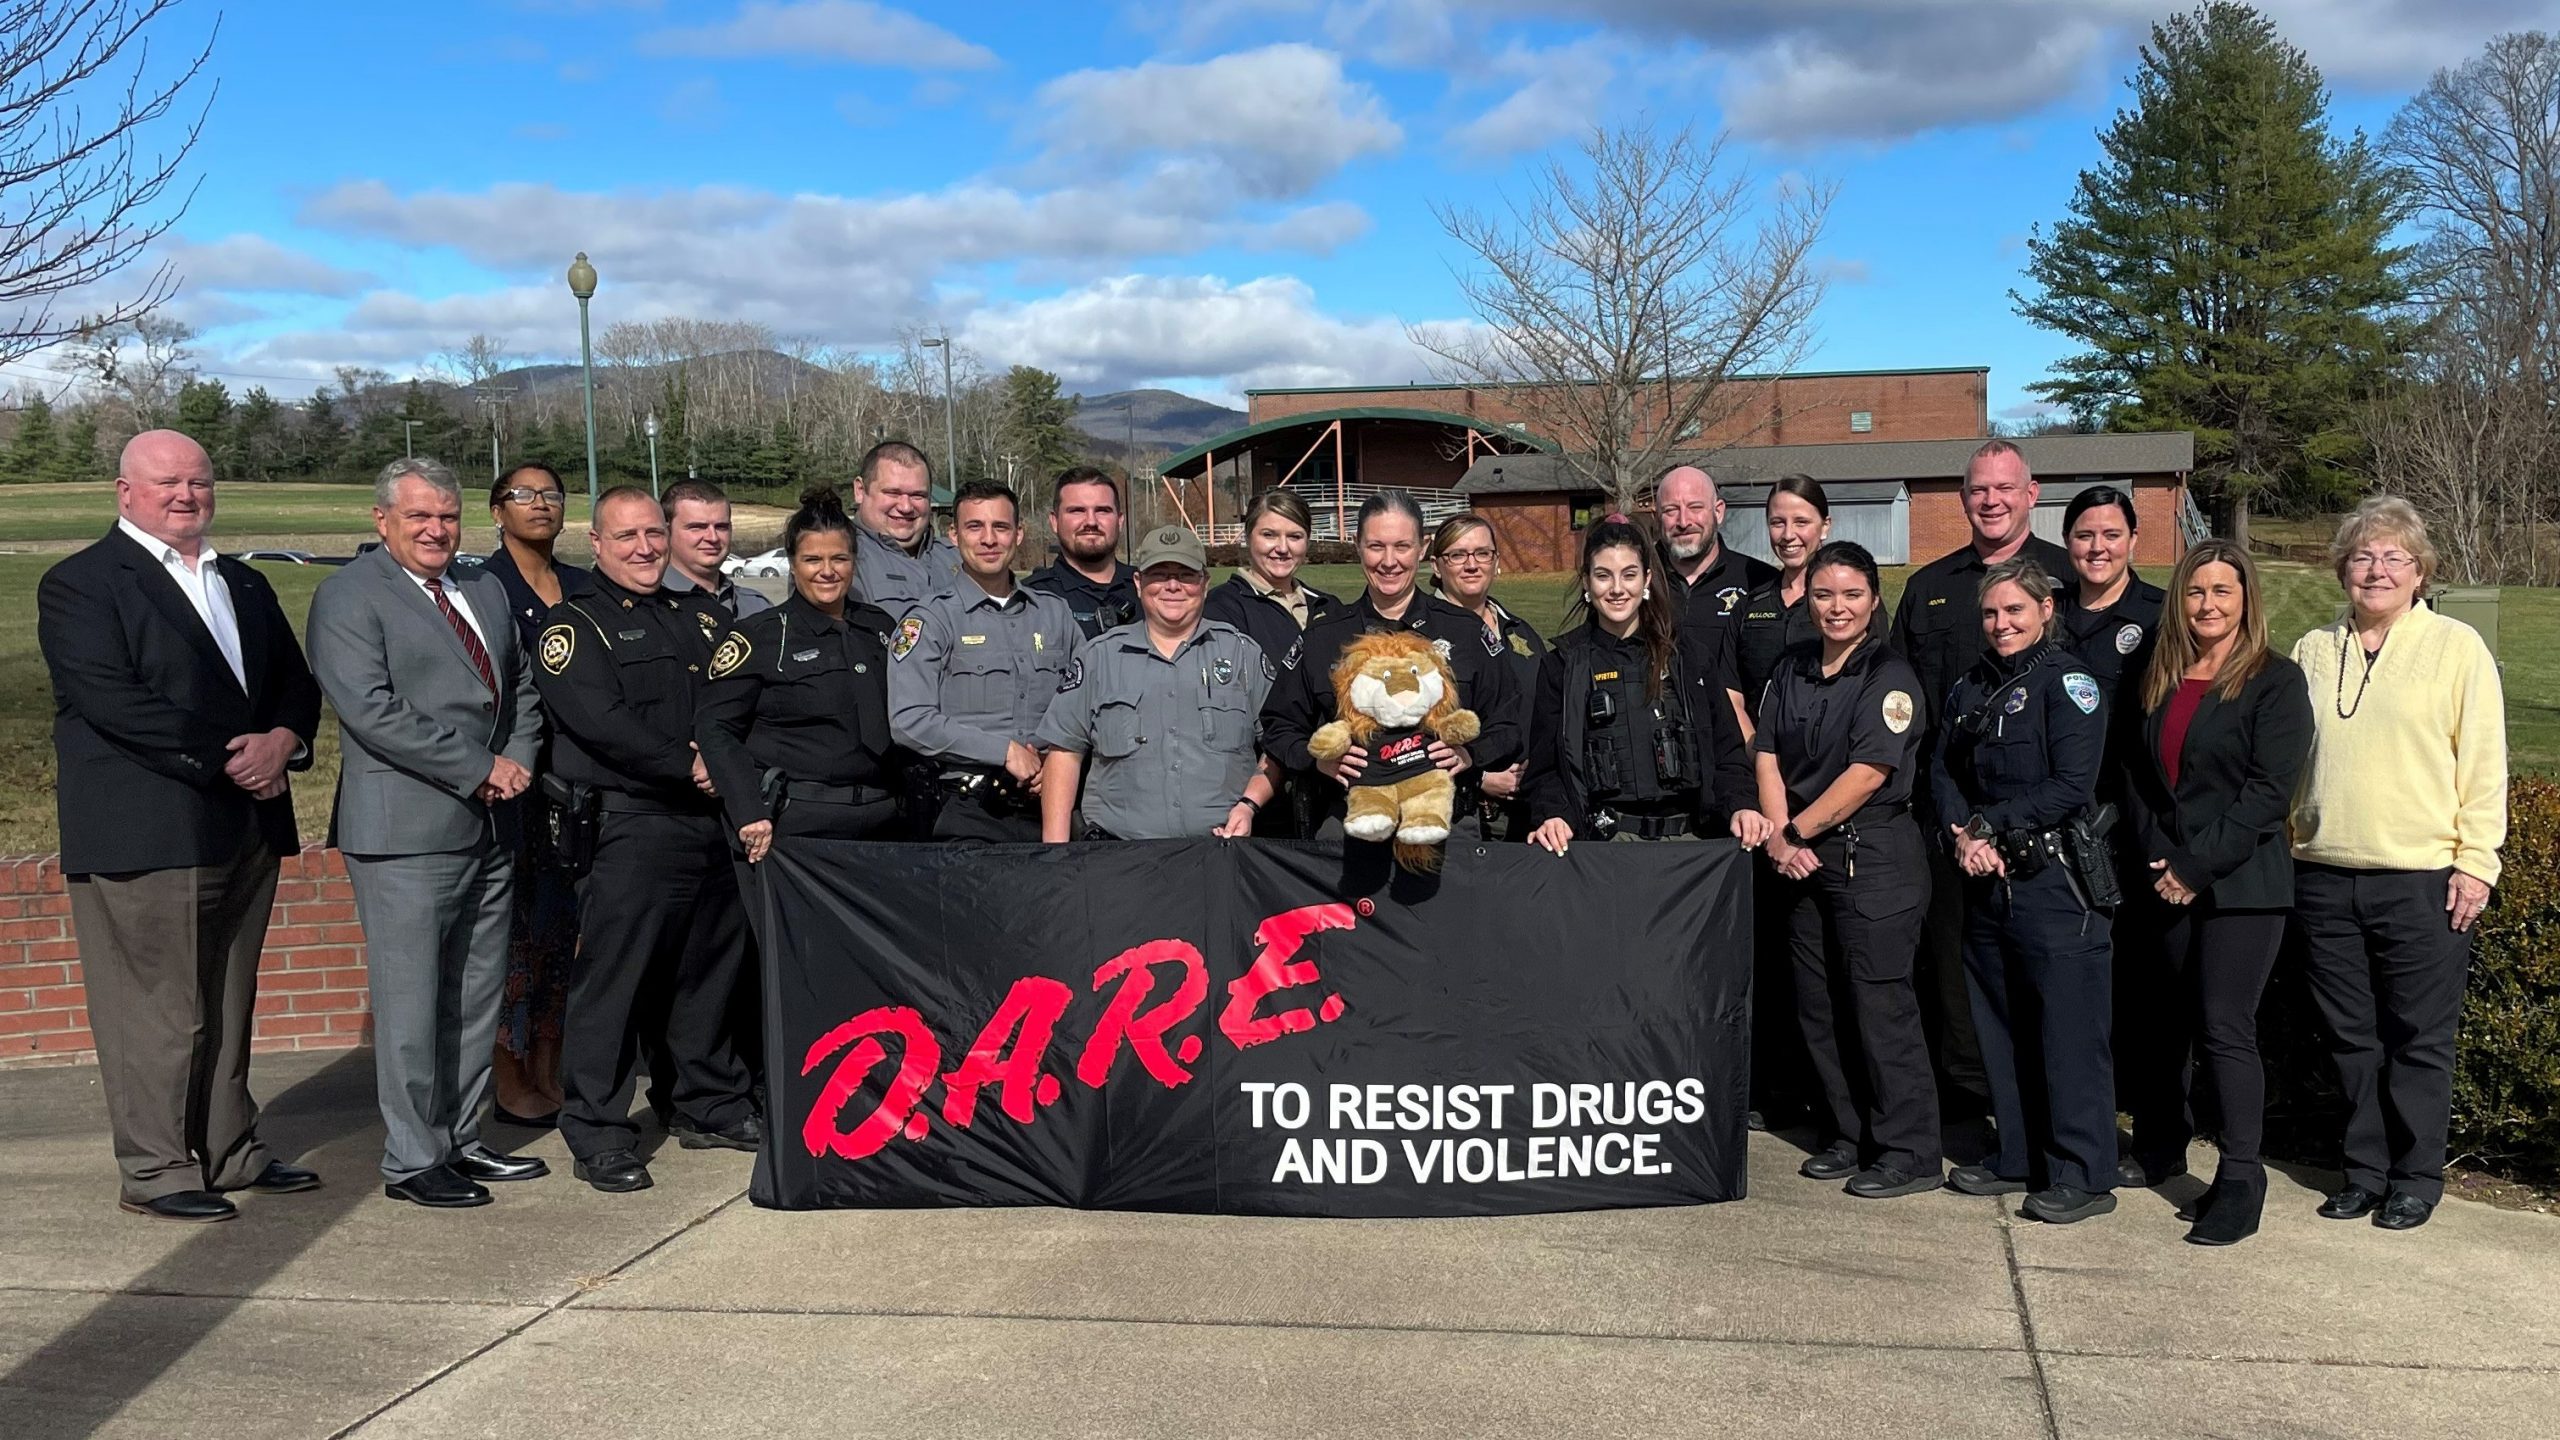 Class Photo from the 2022 North Carolina D.A.R.E. Officer Training